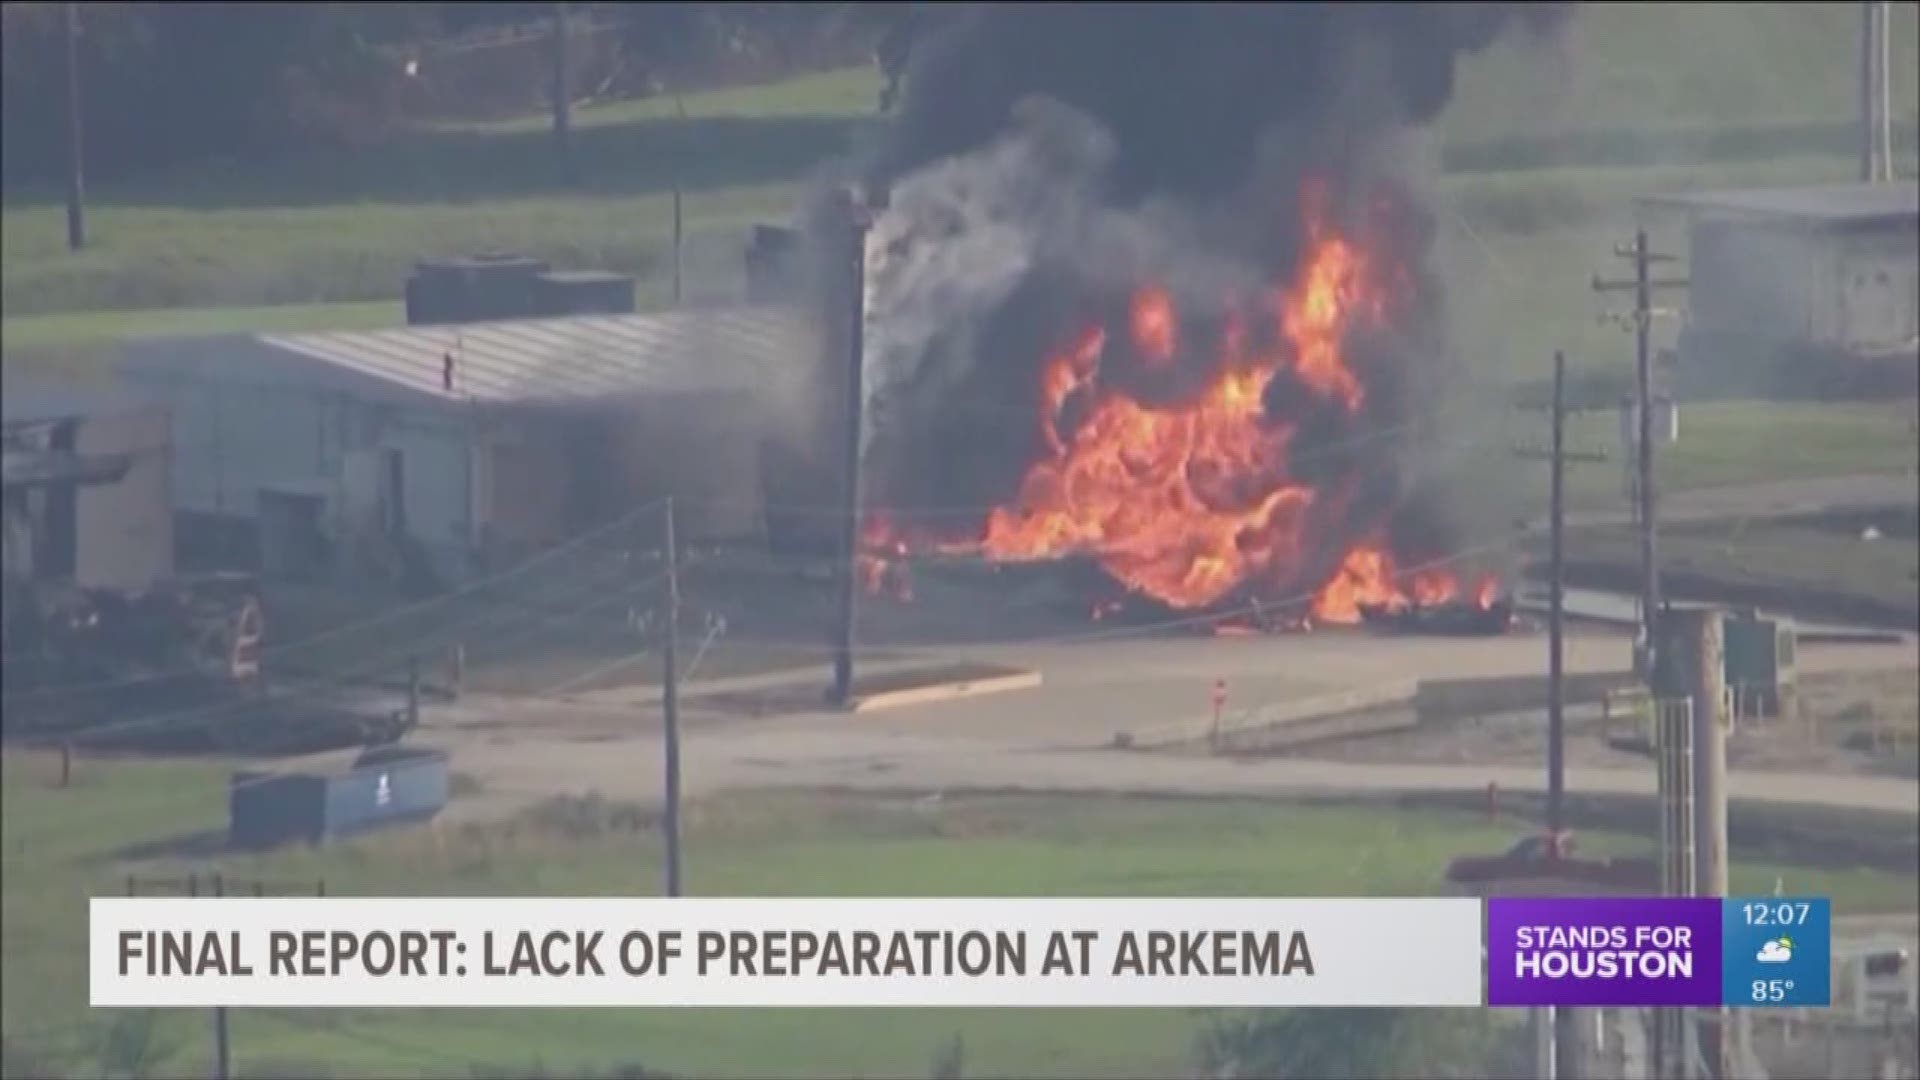 The Chemical Safety Board found that there was a lack of preparation when it came to the Arkema chemical plant explosion following Hurricane Harvey.